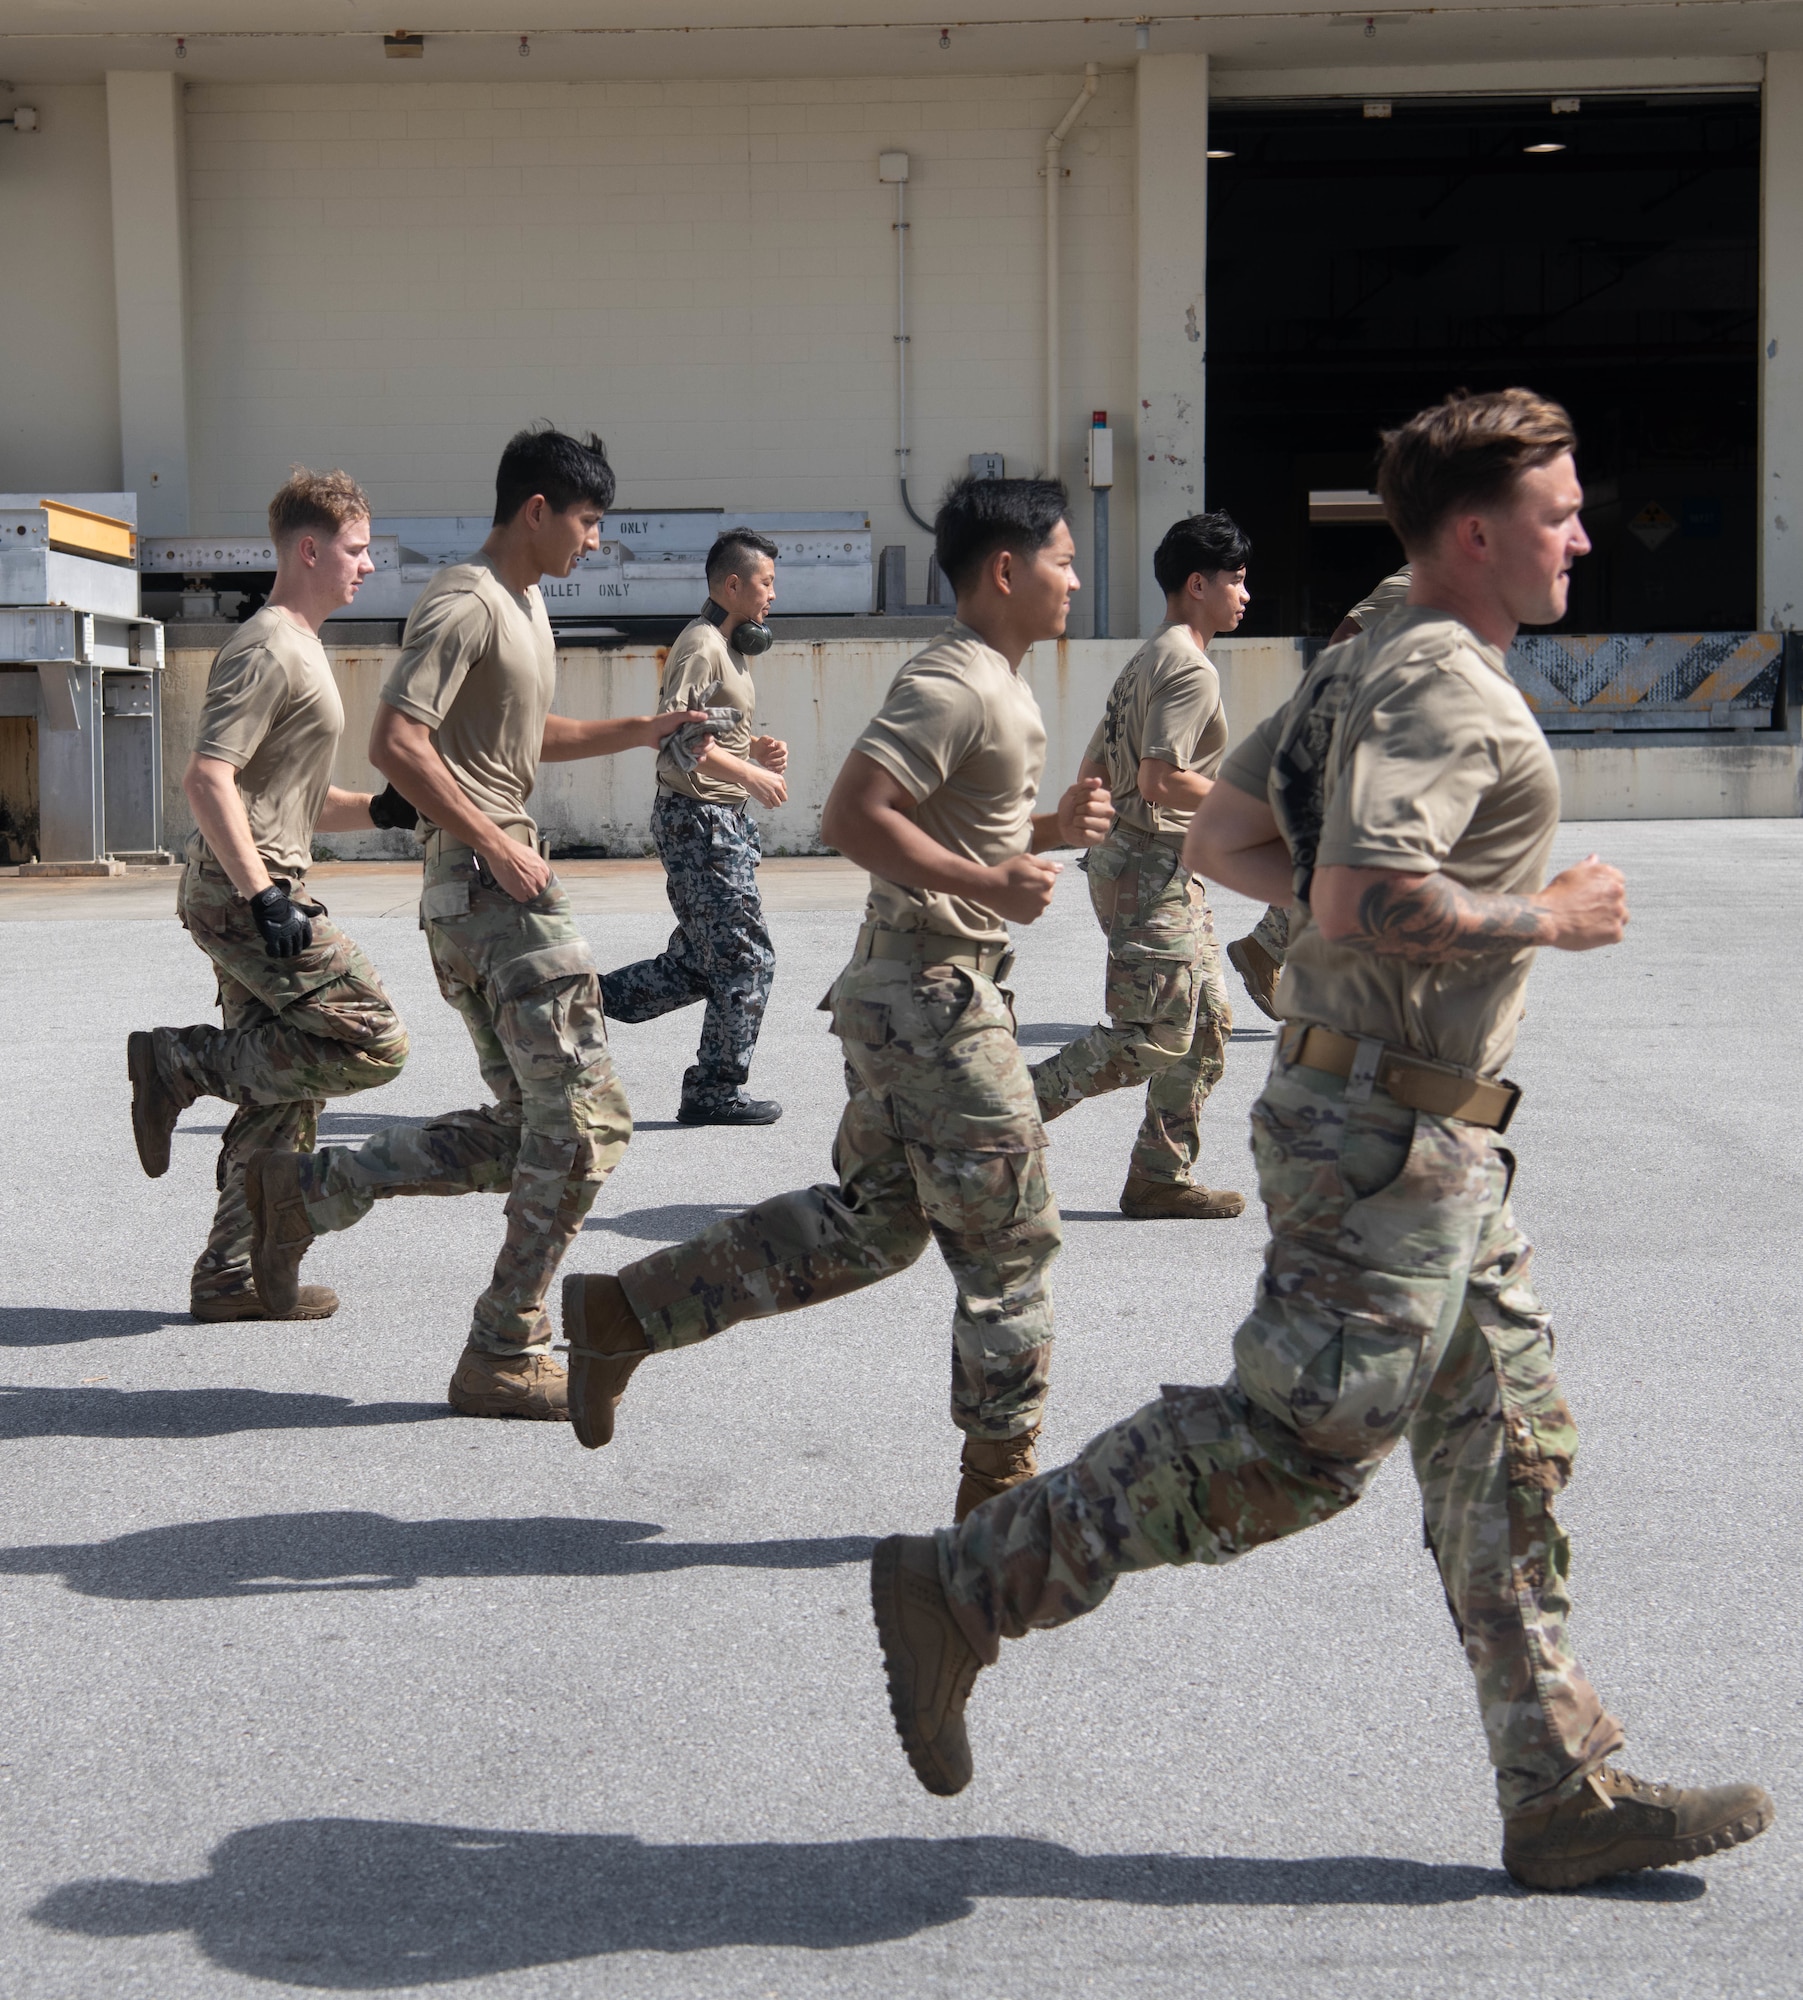 Japan Air Self-Defense Force and 733rd Air Mobility Squadron preform shuttle runs for physical exercise.